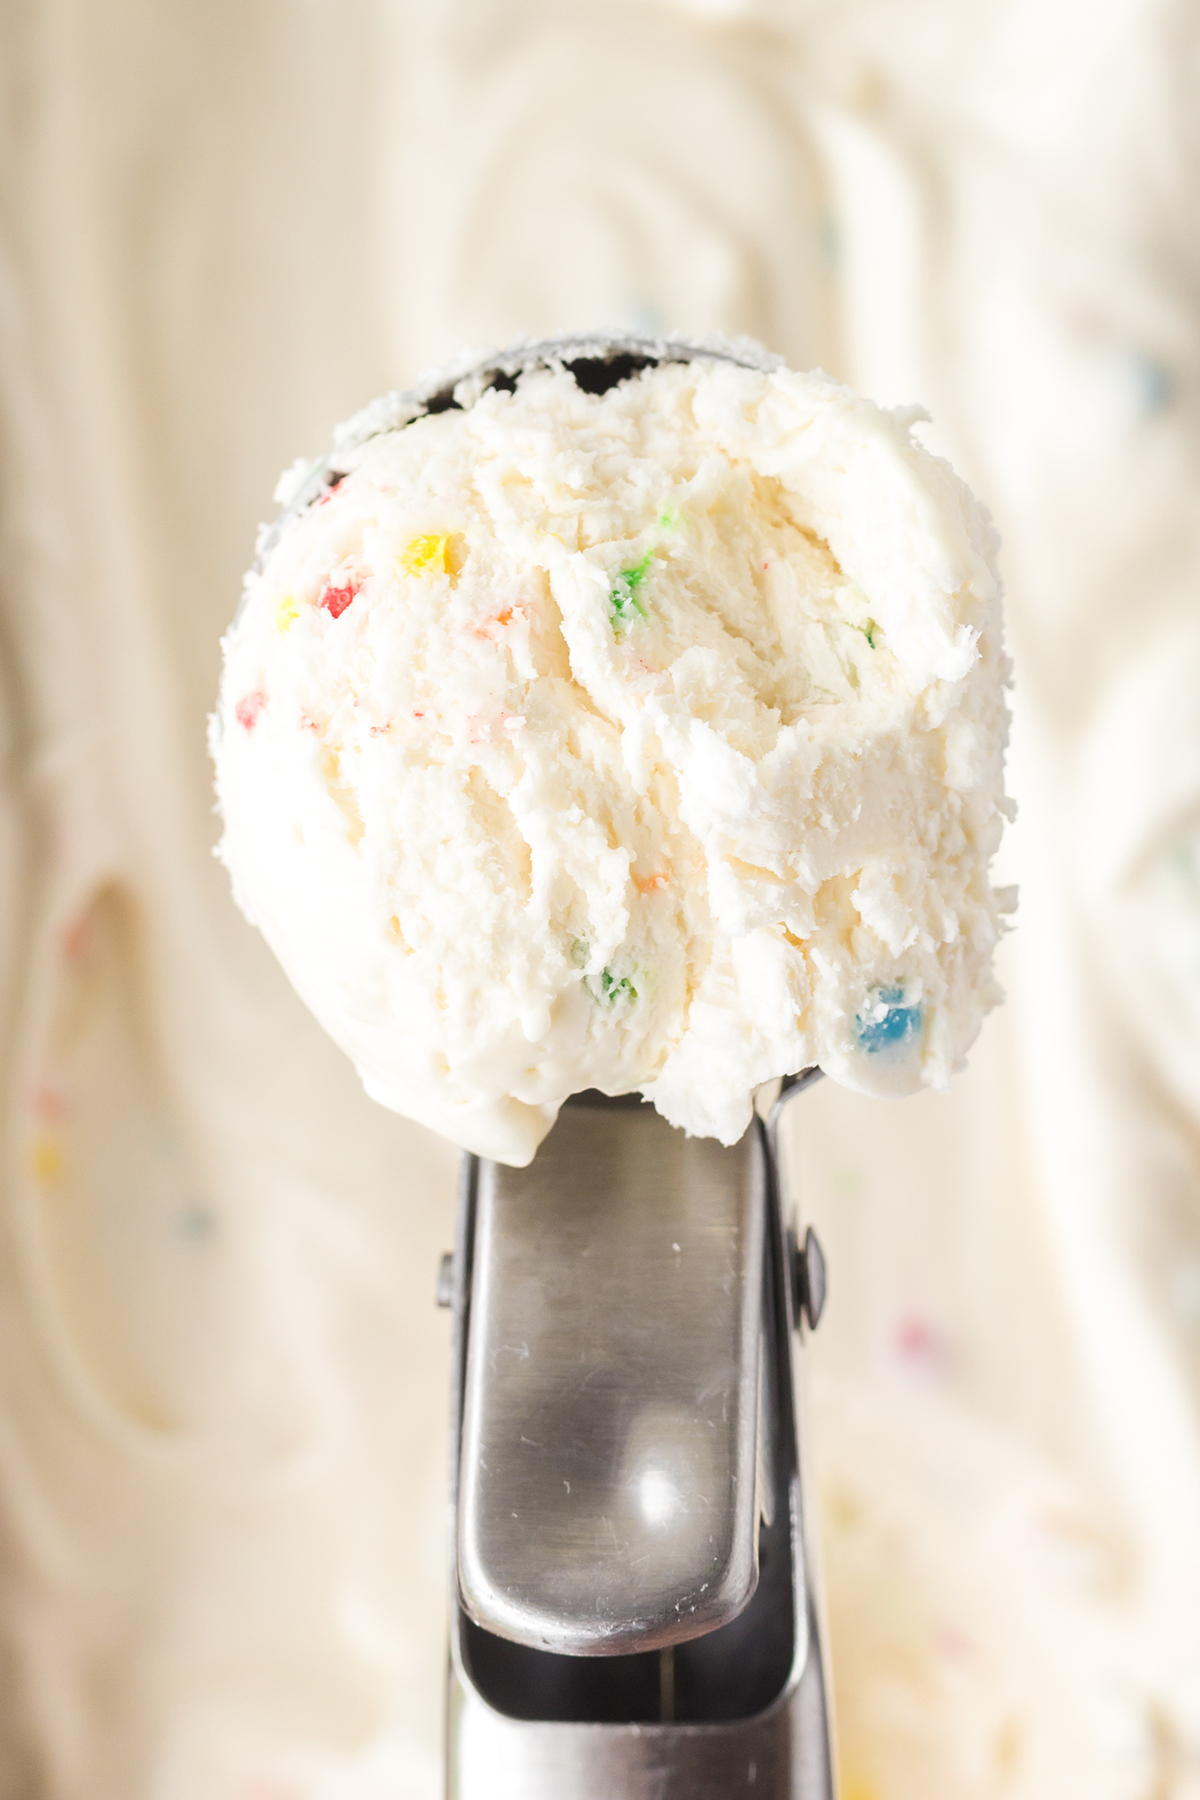 funfetti ice cream scooped out of tub